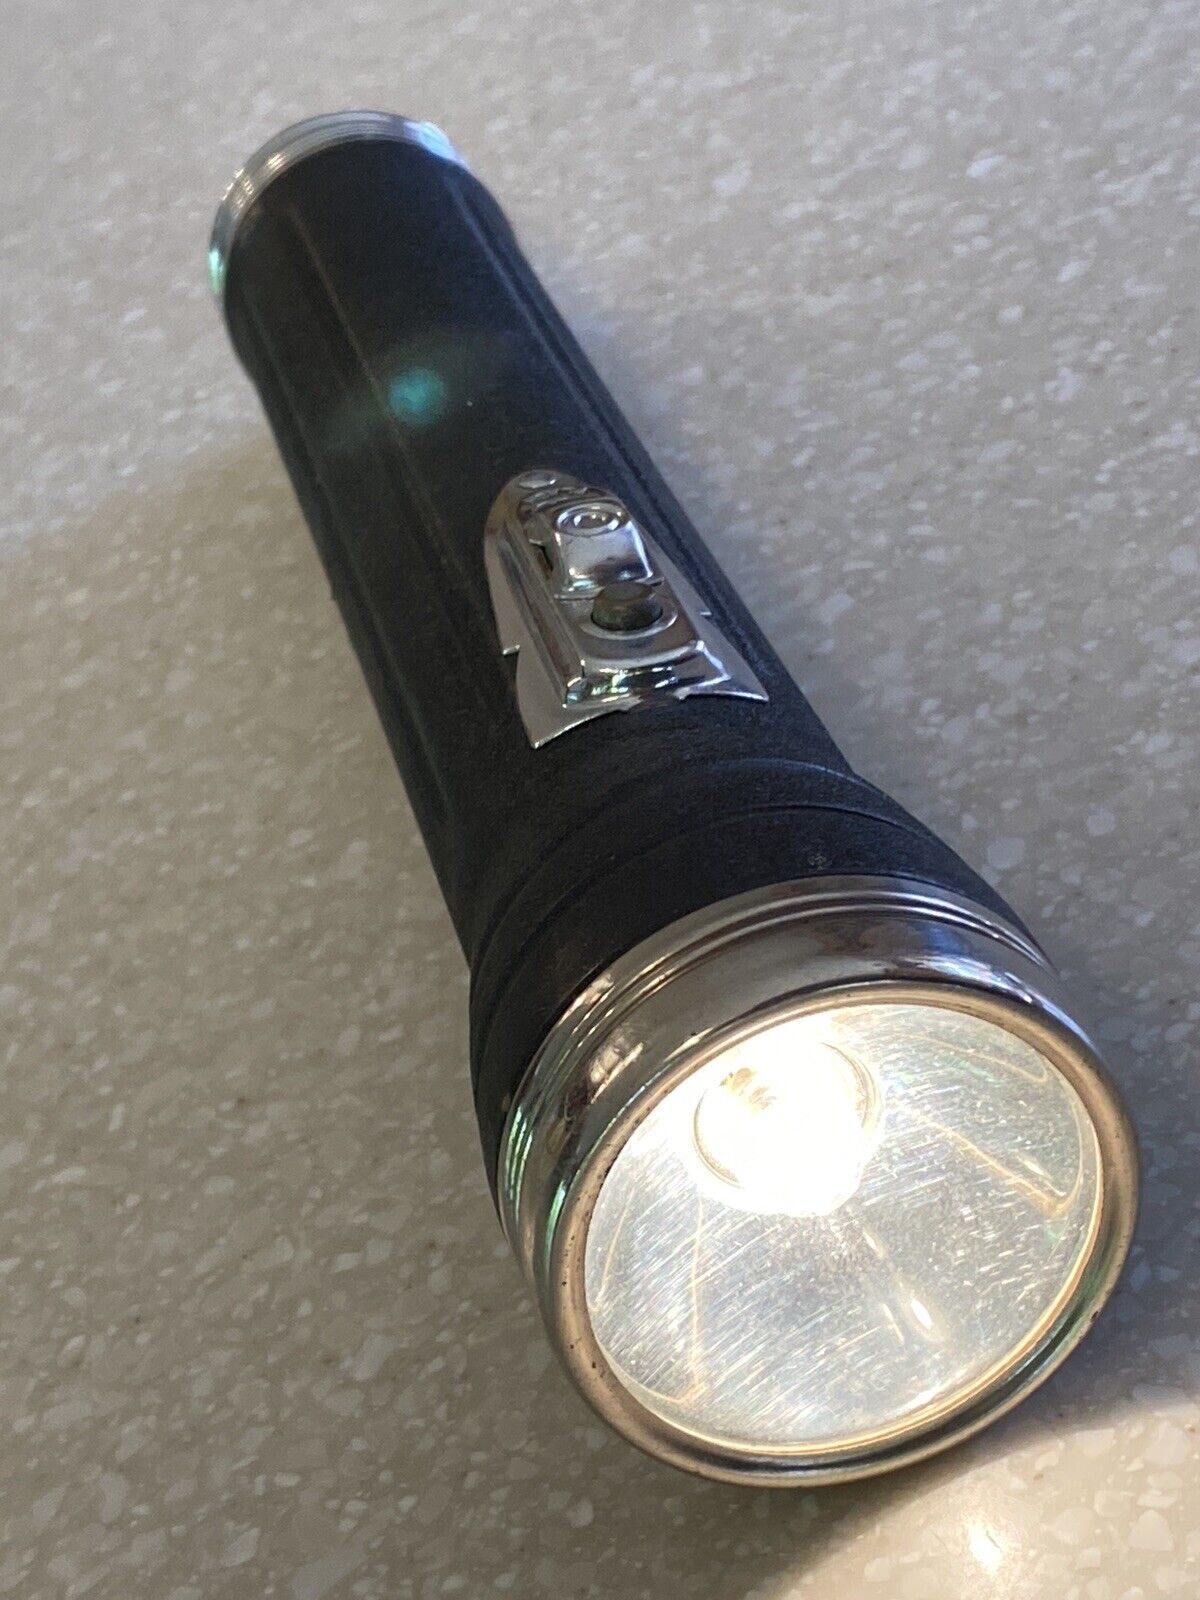 Early Vintage Winchester High Power 3 D Cell Flashlight - Very Nice Condition